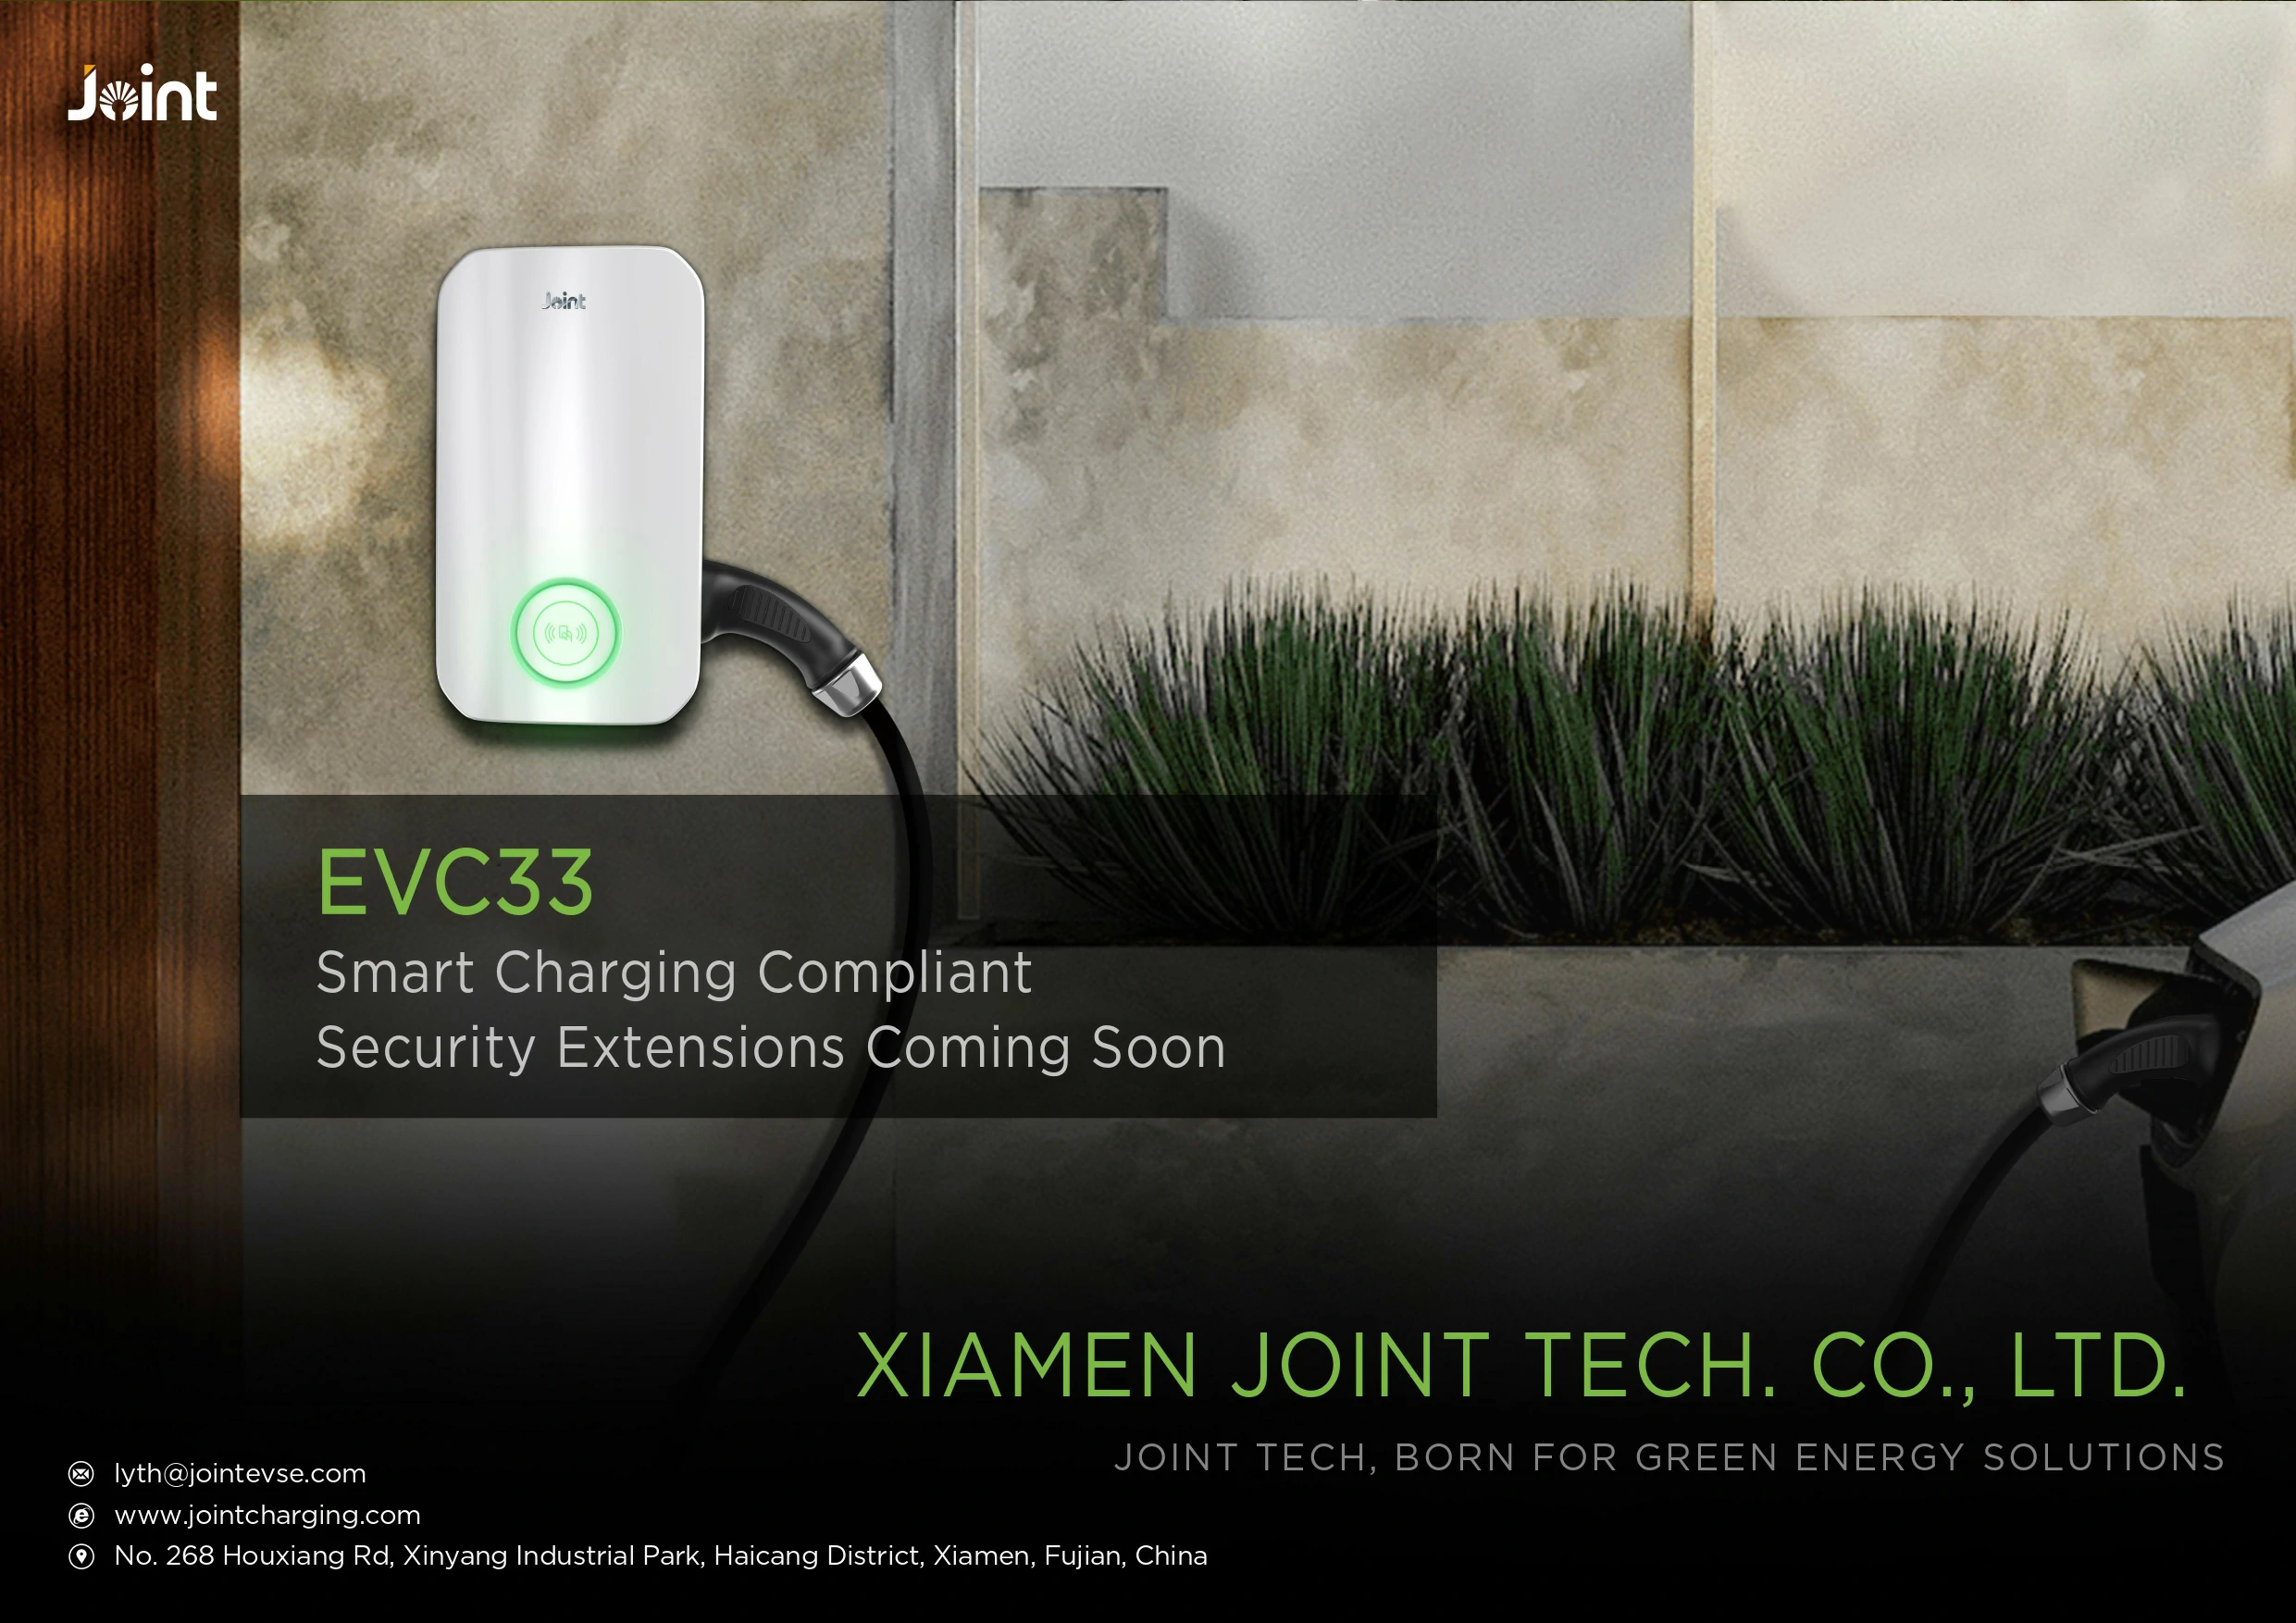 The EVC 33 is a wall/post mount Mode3 smart charger with up to 22kW output with IEC62196-2, Type 2 Plug&Socket.